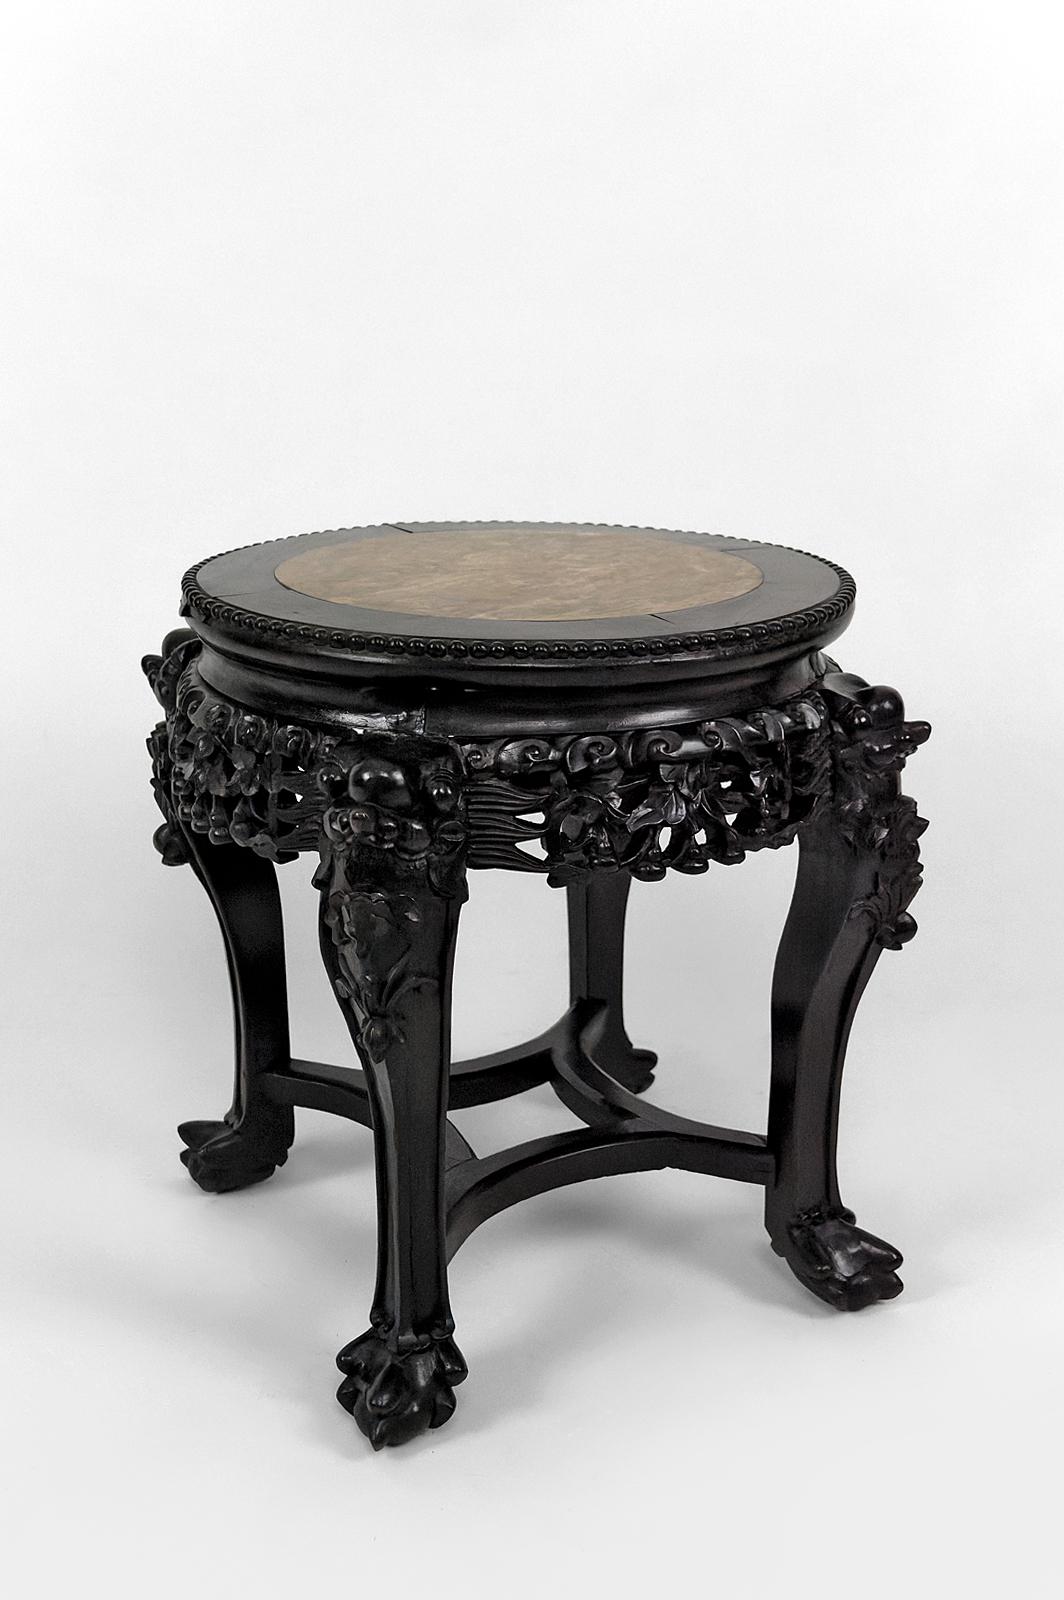 Superb low side table / gueridon / Coffee table / pedestal table / plant holder / pot holder / pedestal in carved solid wood.

The sculptures feature dragon/demon heads, tiger/lion paws and plant motifs.
The top is made of marble.

Asia, South China